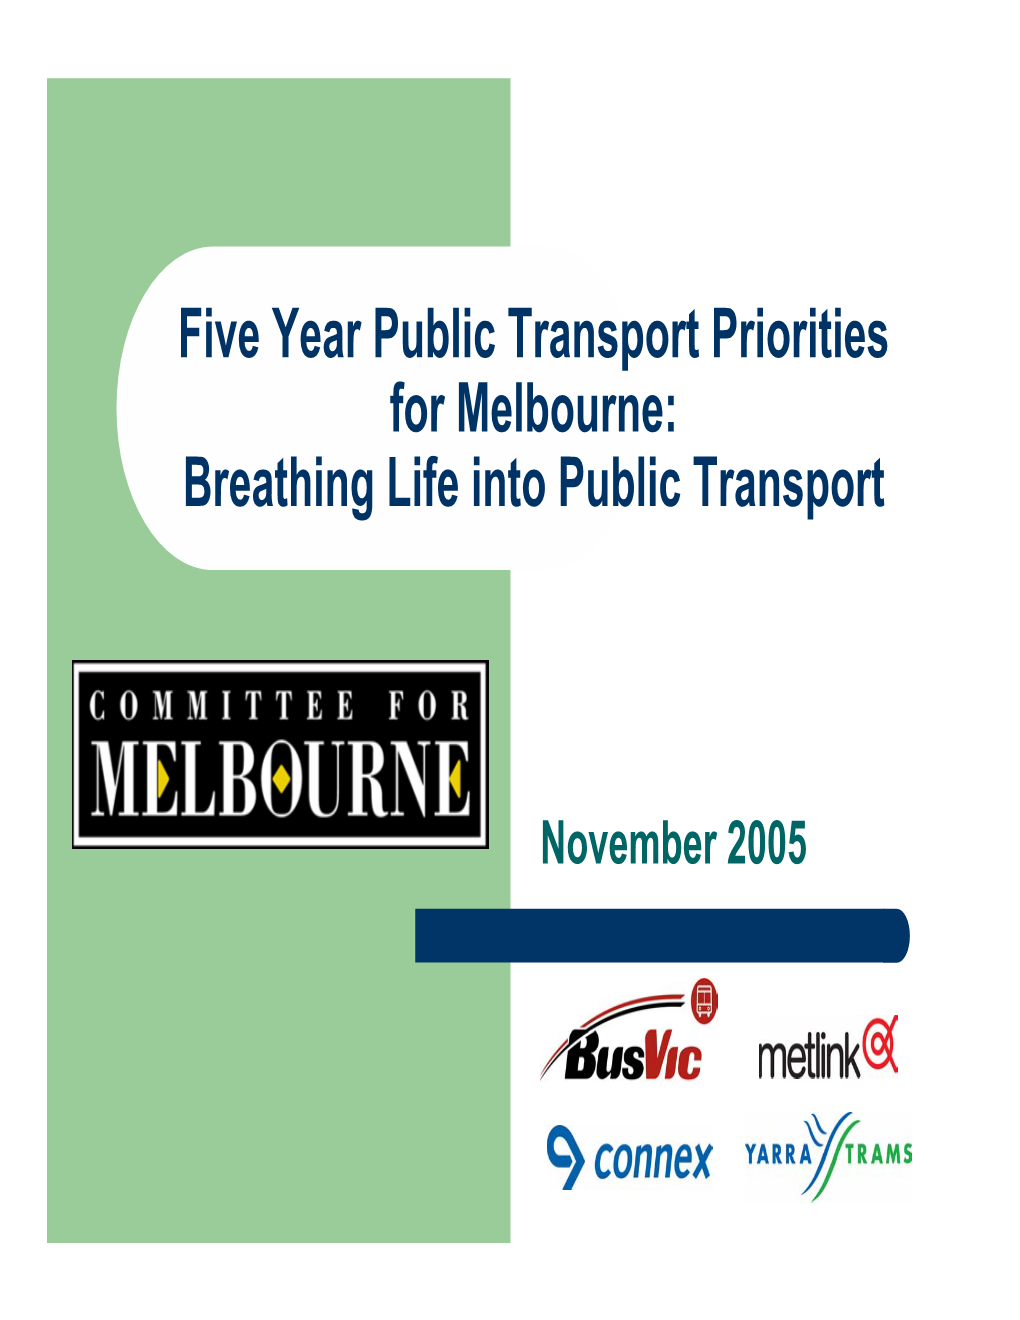 Five Year Public Transport Priorities for Melbourne: Breathing Life Into Public Transport